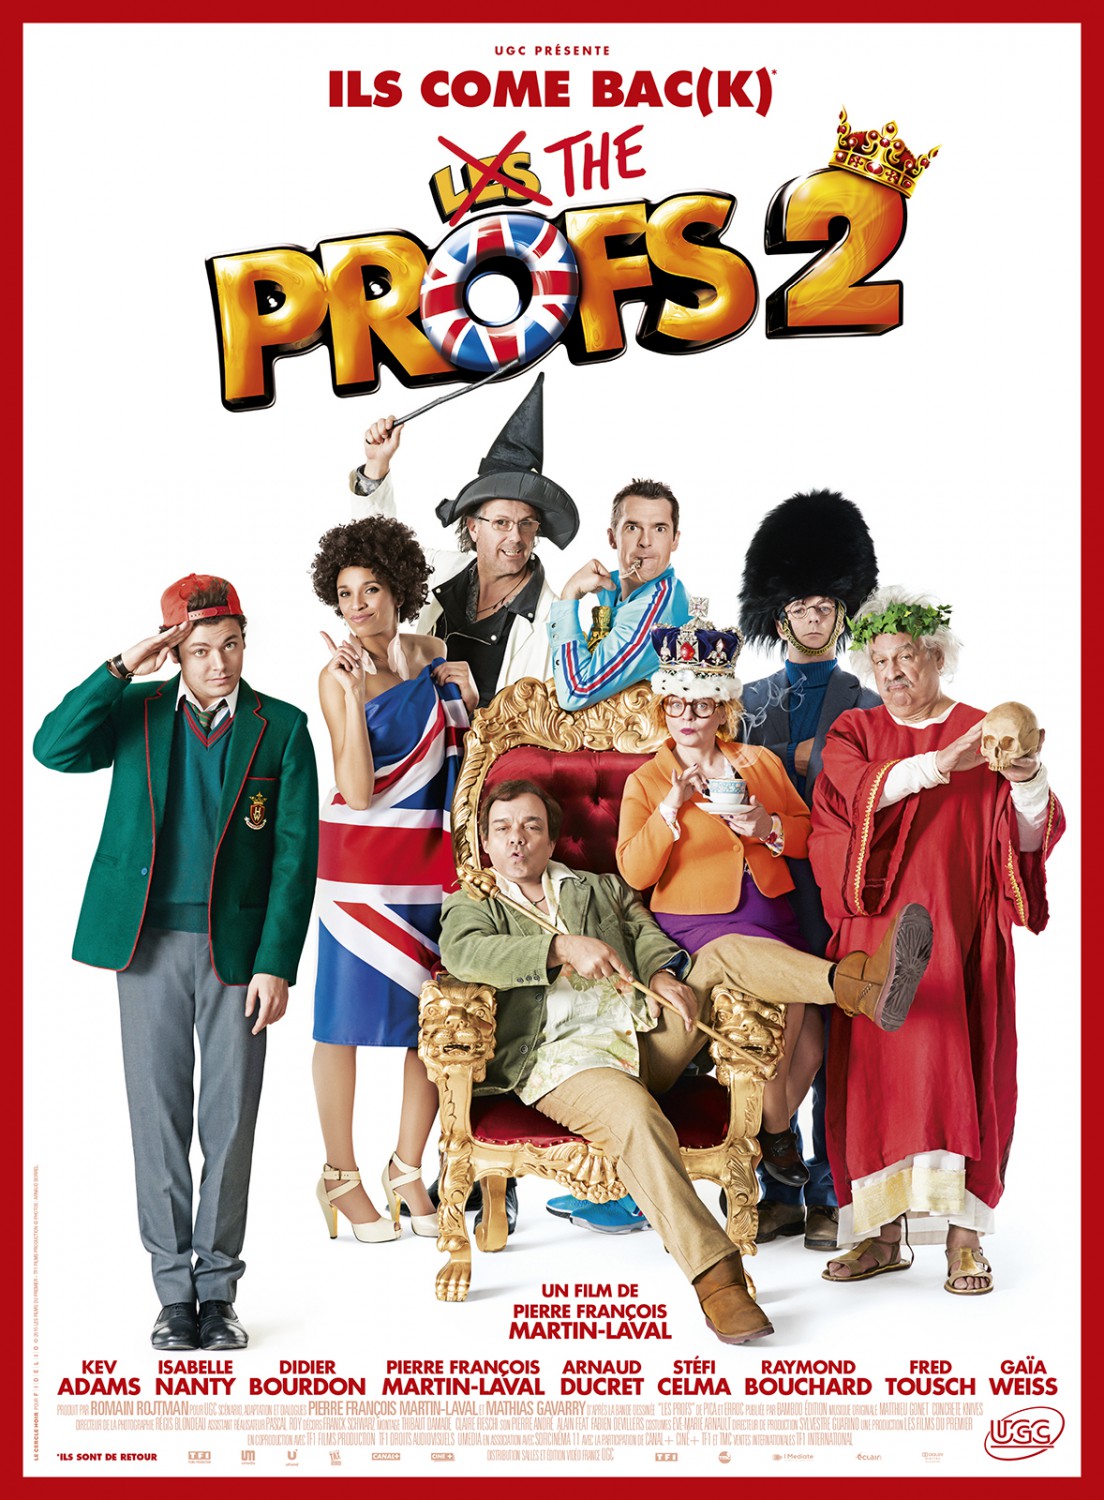 Extra Large Movie Poster Image for Les profs 2 (#2 of 2)